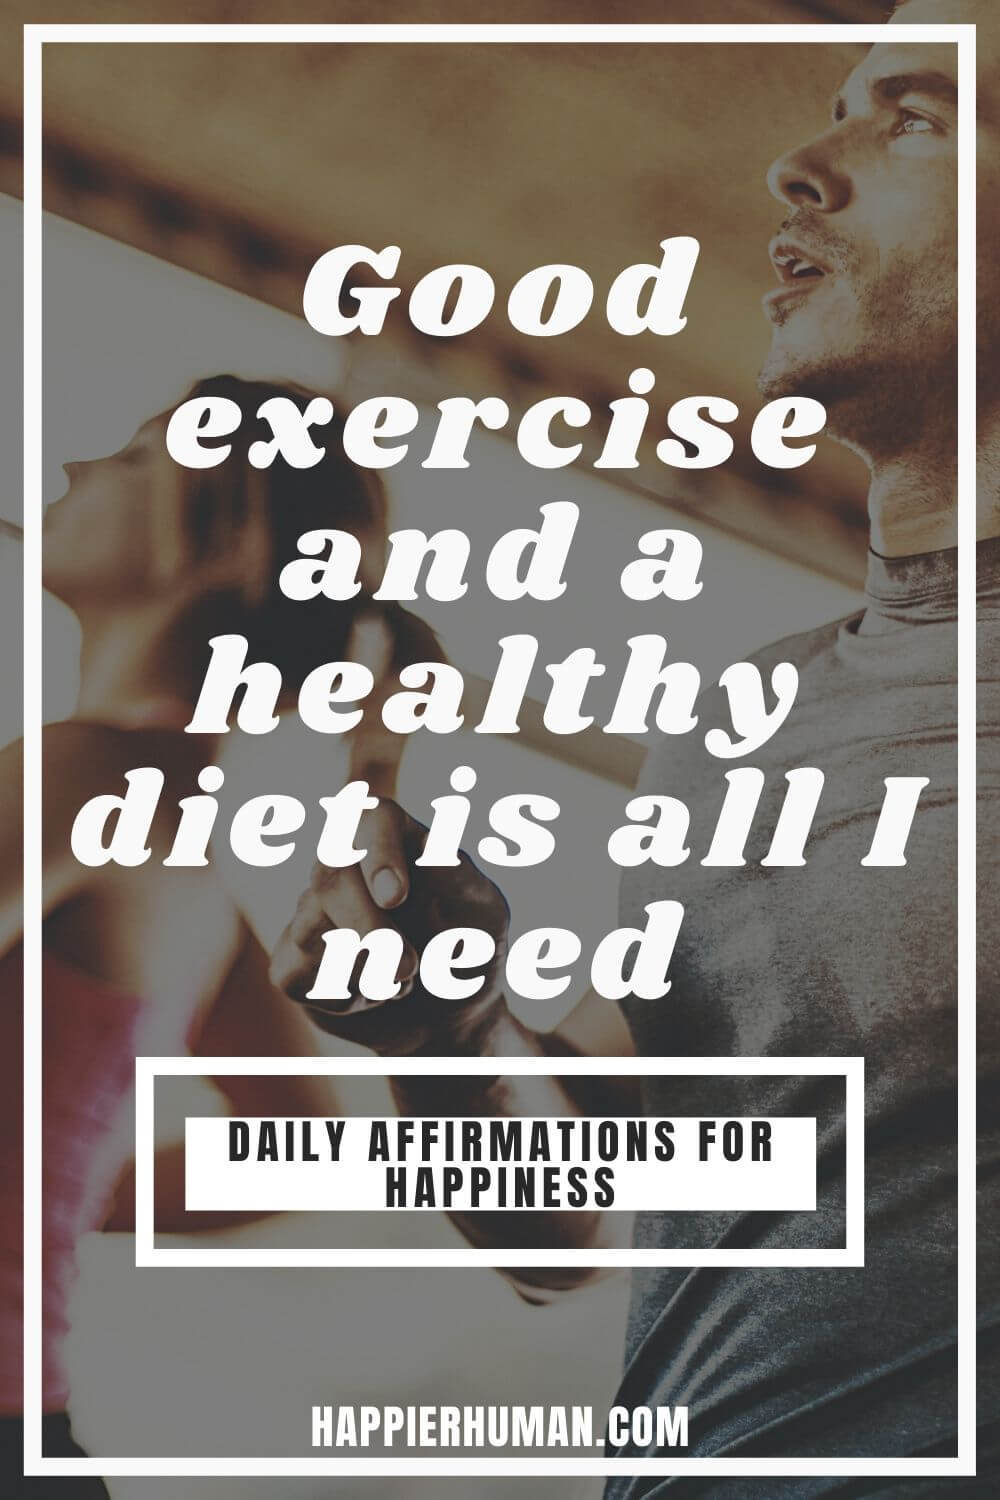 Daily Affirmations for Happiness - Good exercise and a healthy diet is all I need  | affirmations for success | affirmations for love | powerful affirmations #affirmations #affirmationsoftheday #affirmationsdaily